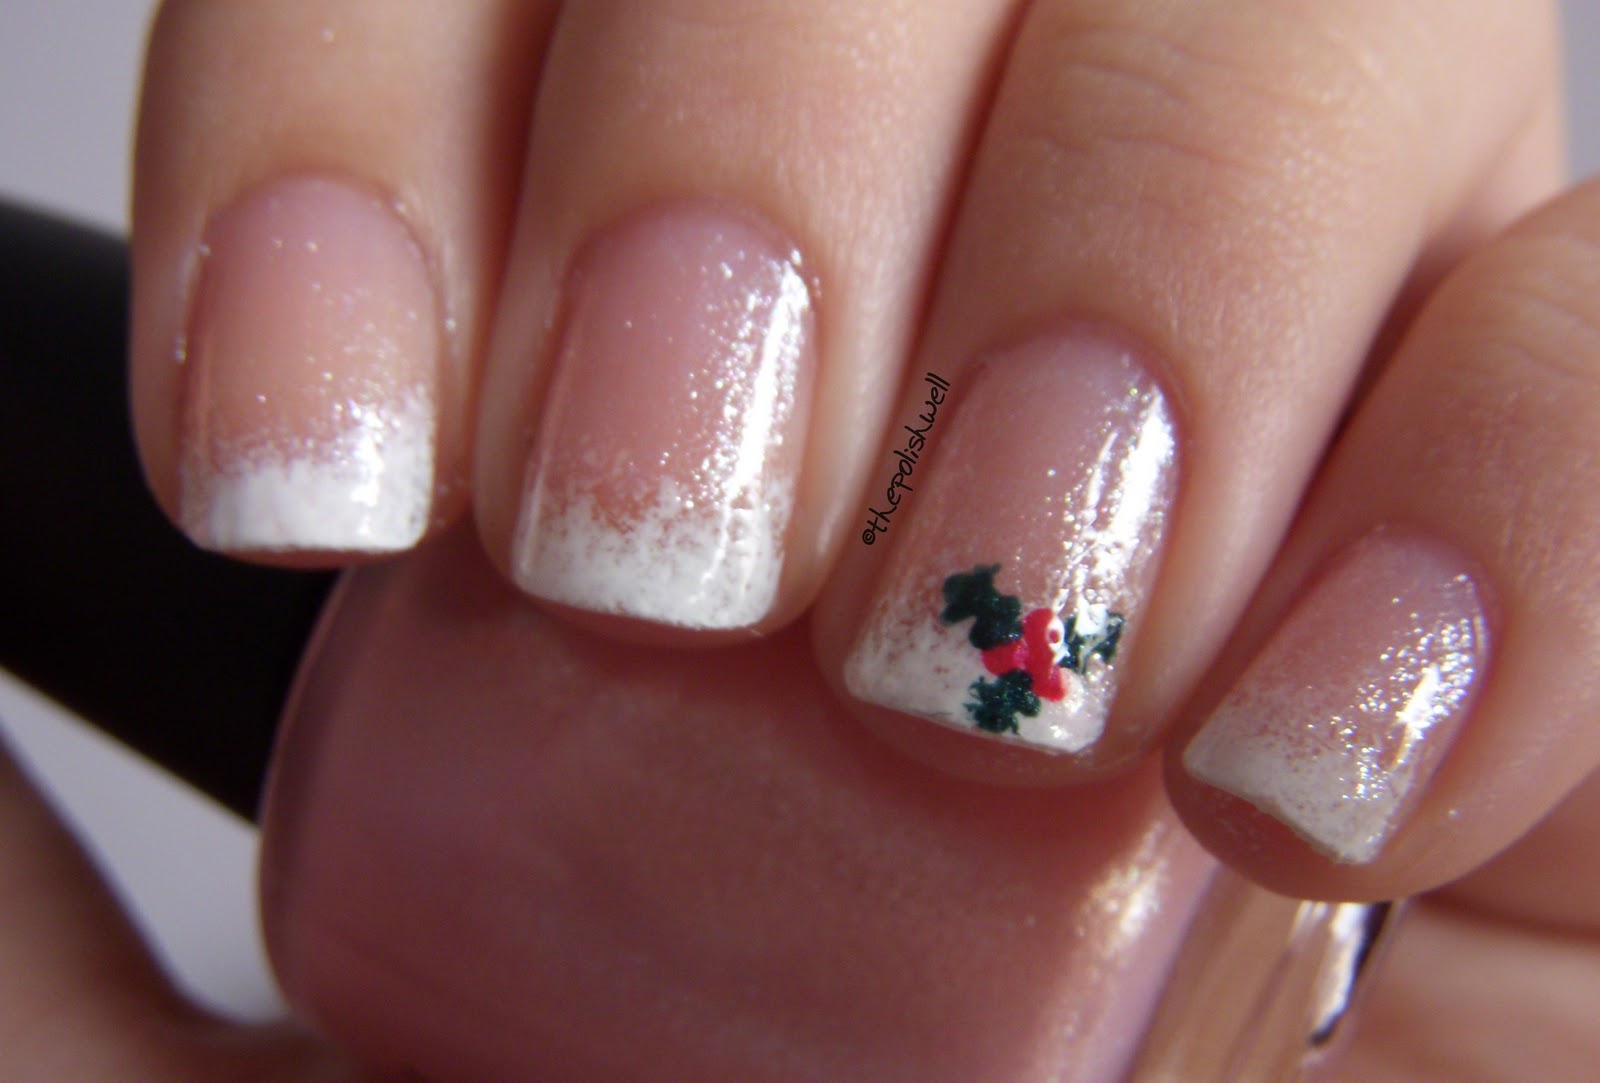 2. "Christmas-Themed French Manicure Designs" - wide 9